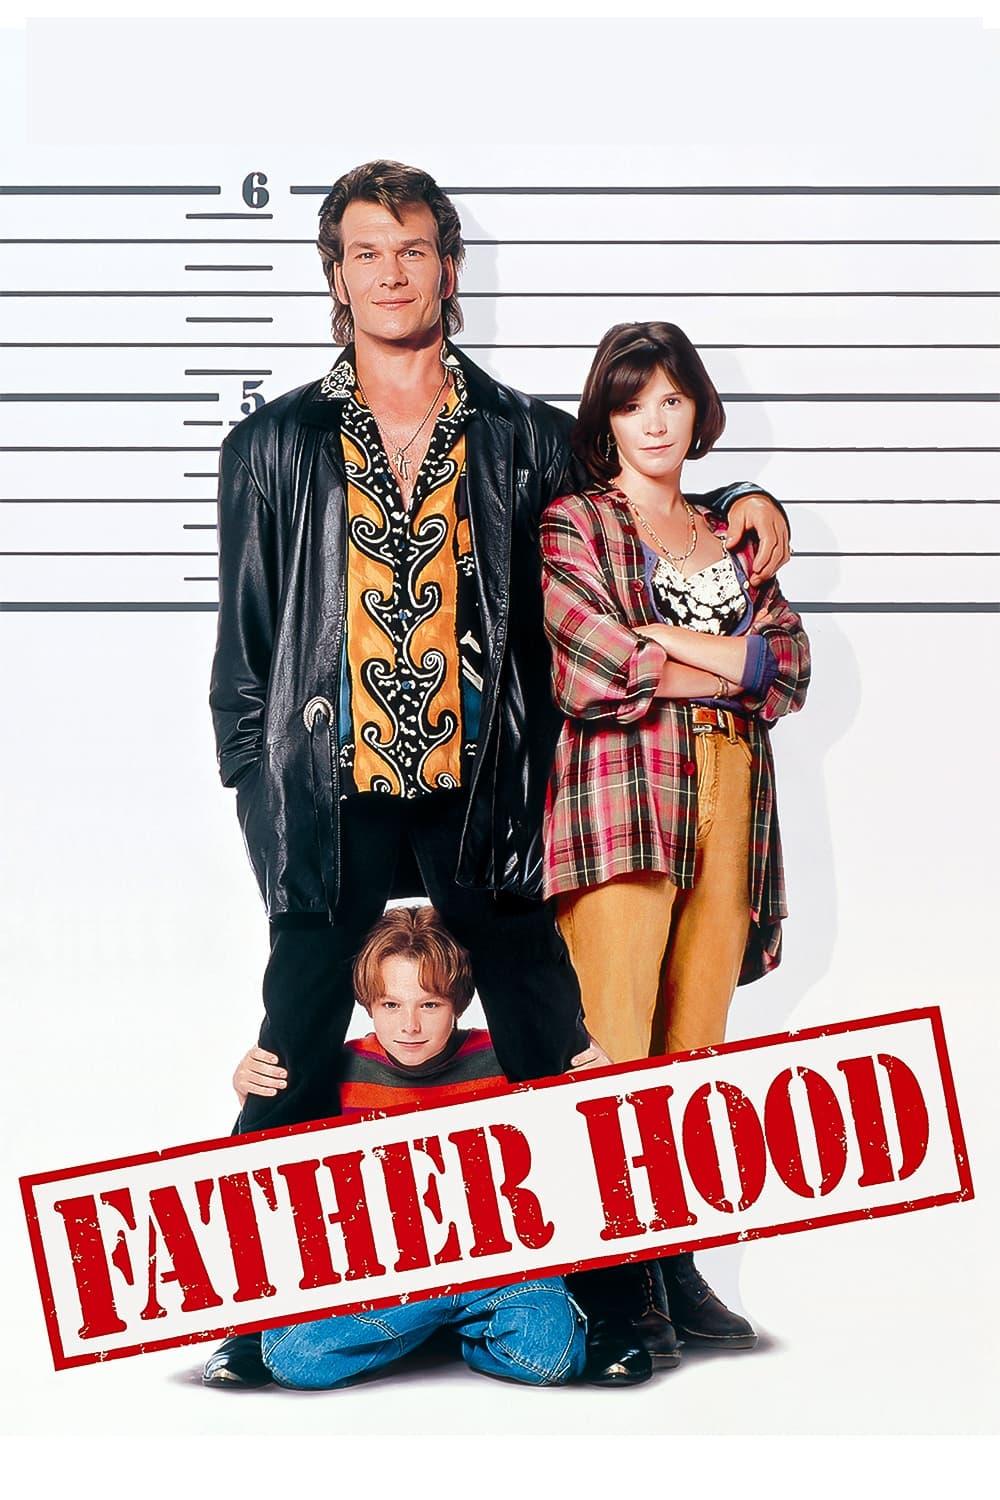 Father Hood poster